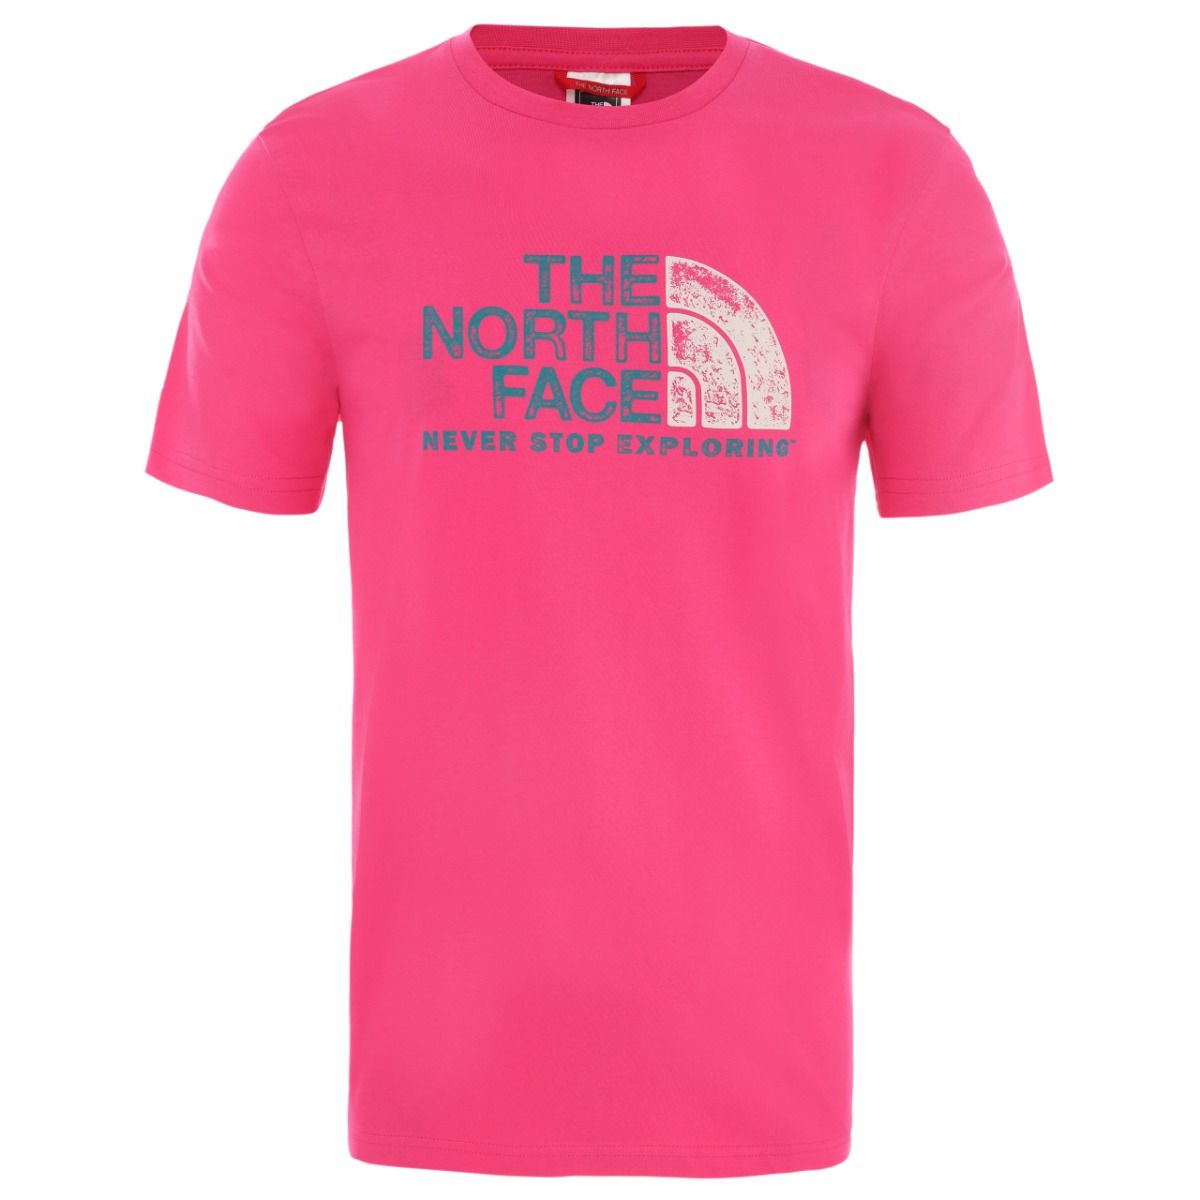 The North Face Mens Rust 2 T-shirt